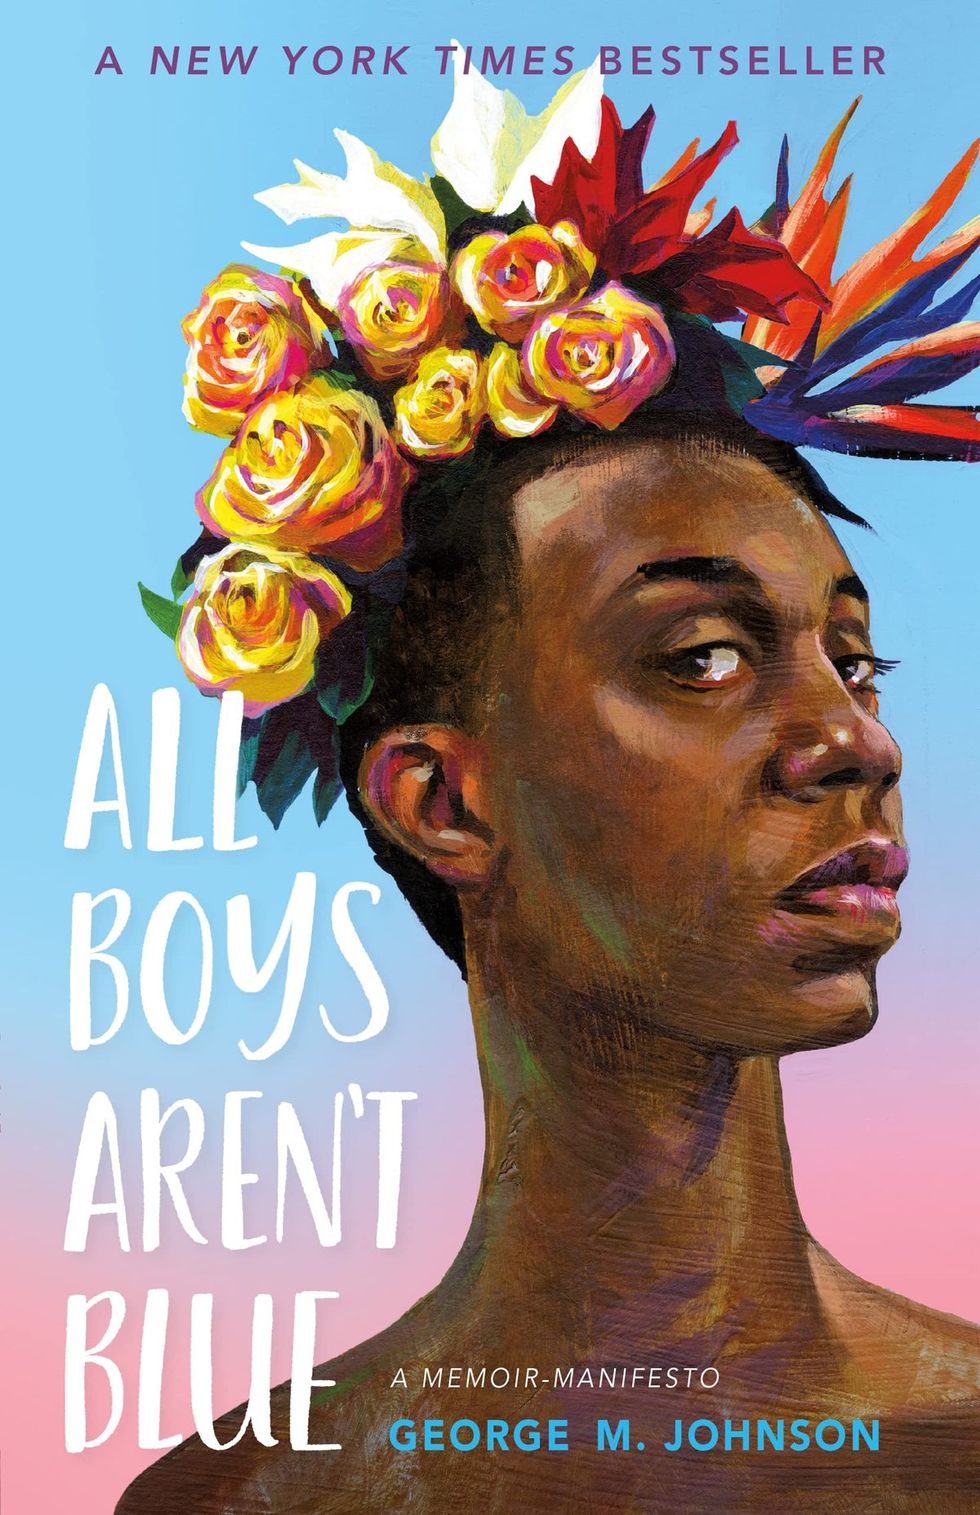 Book Cover All Boys Arent Blue by George M. Johnson